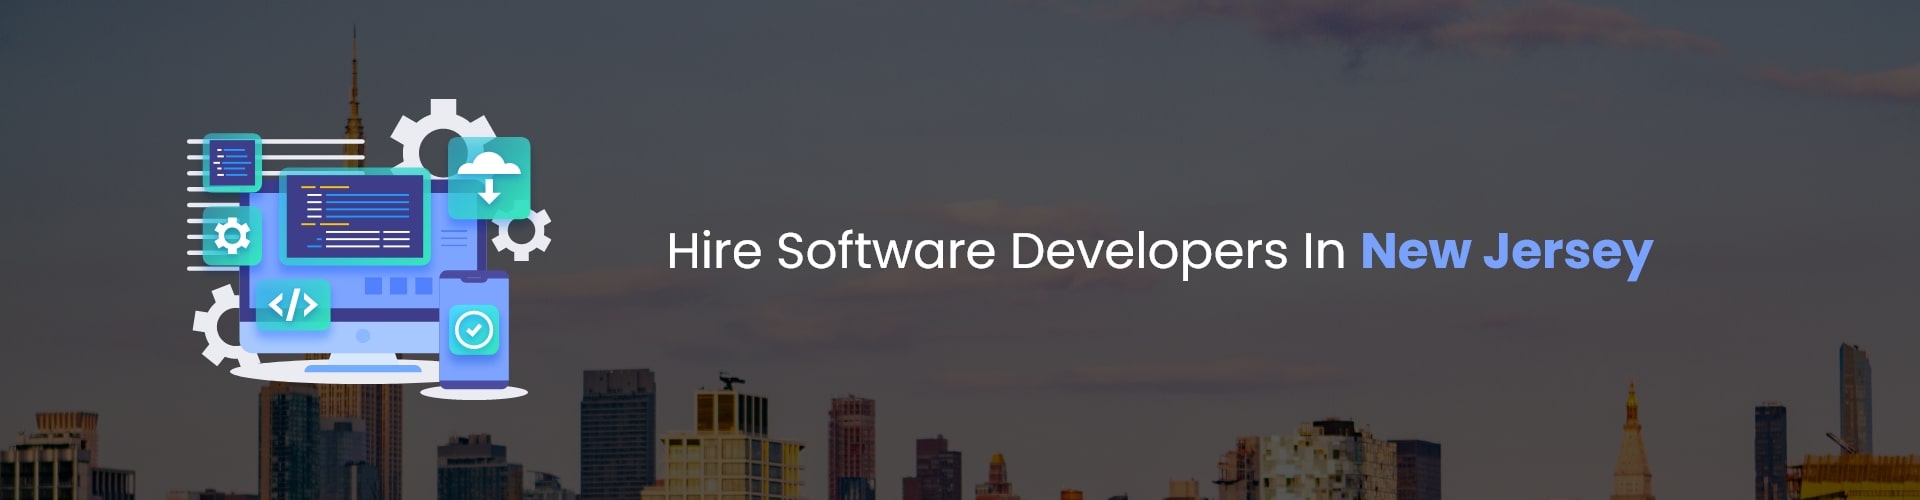 hire software developers in new jersey